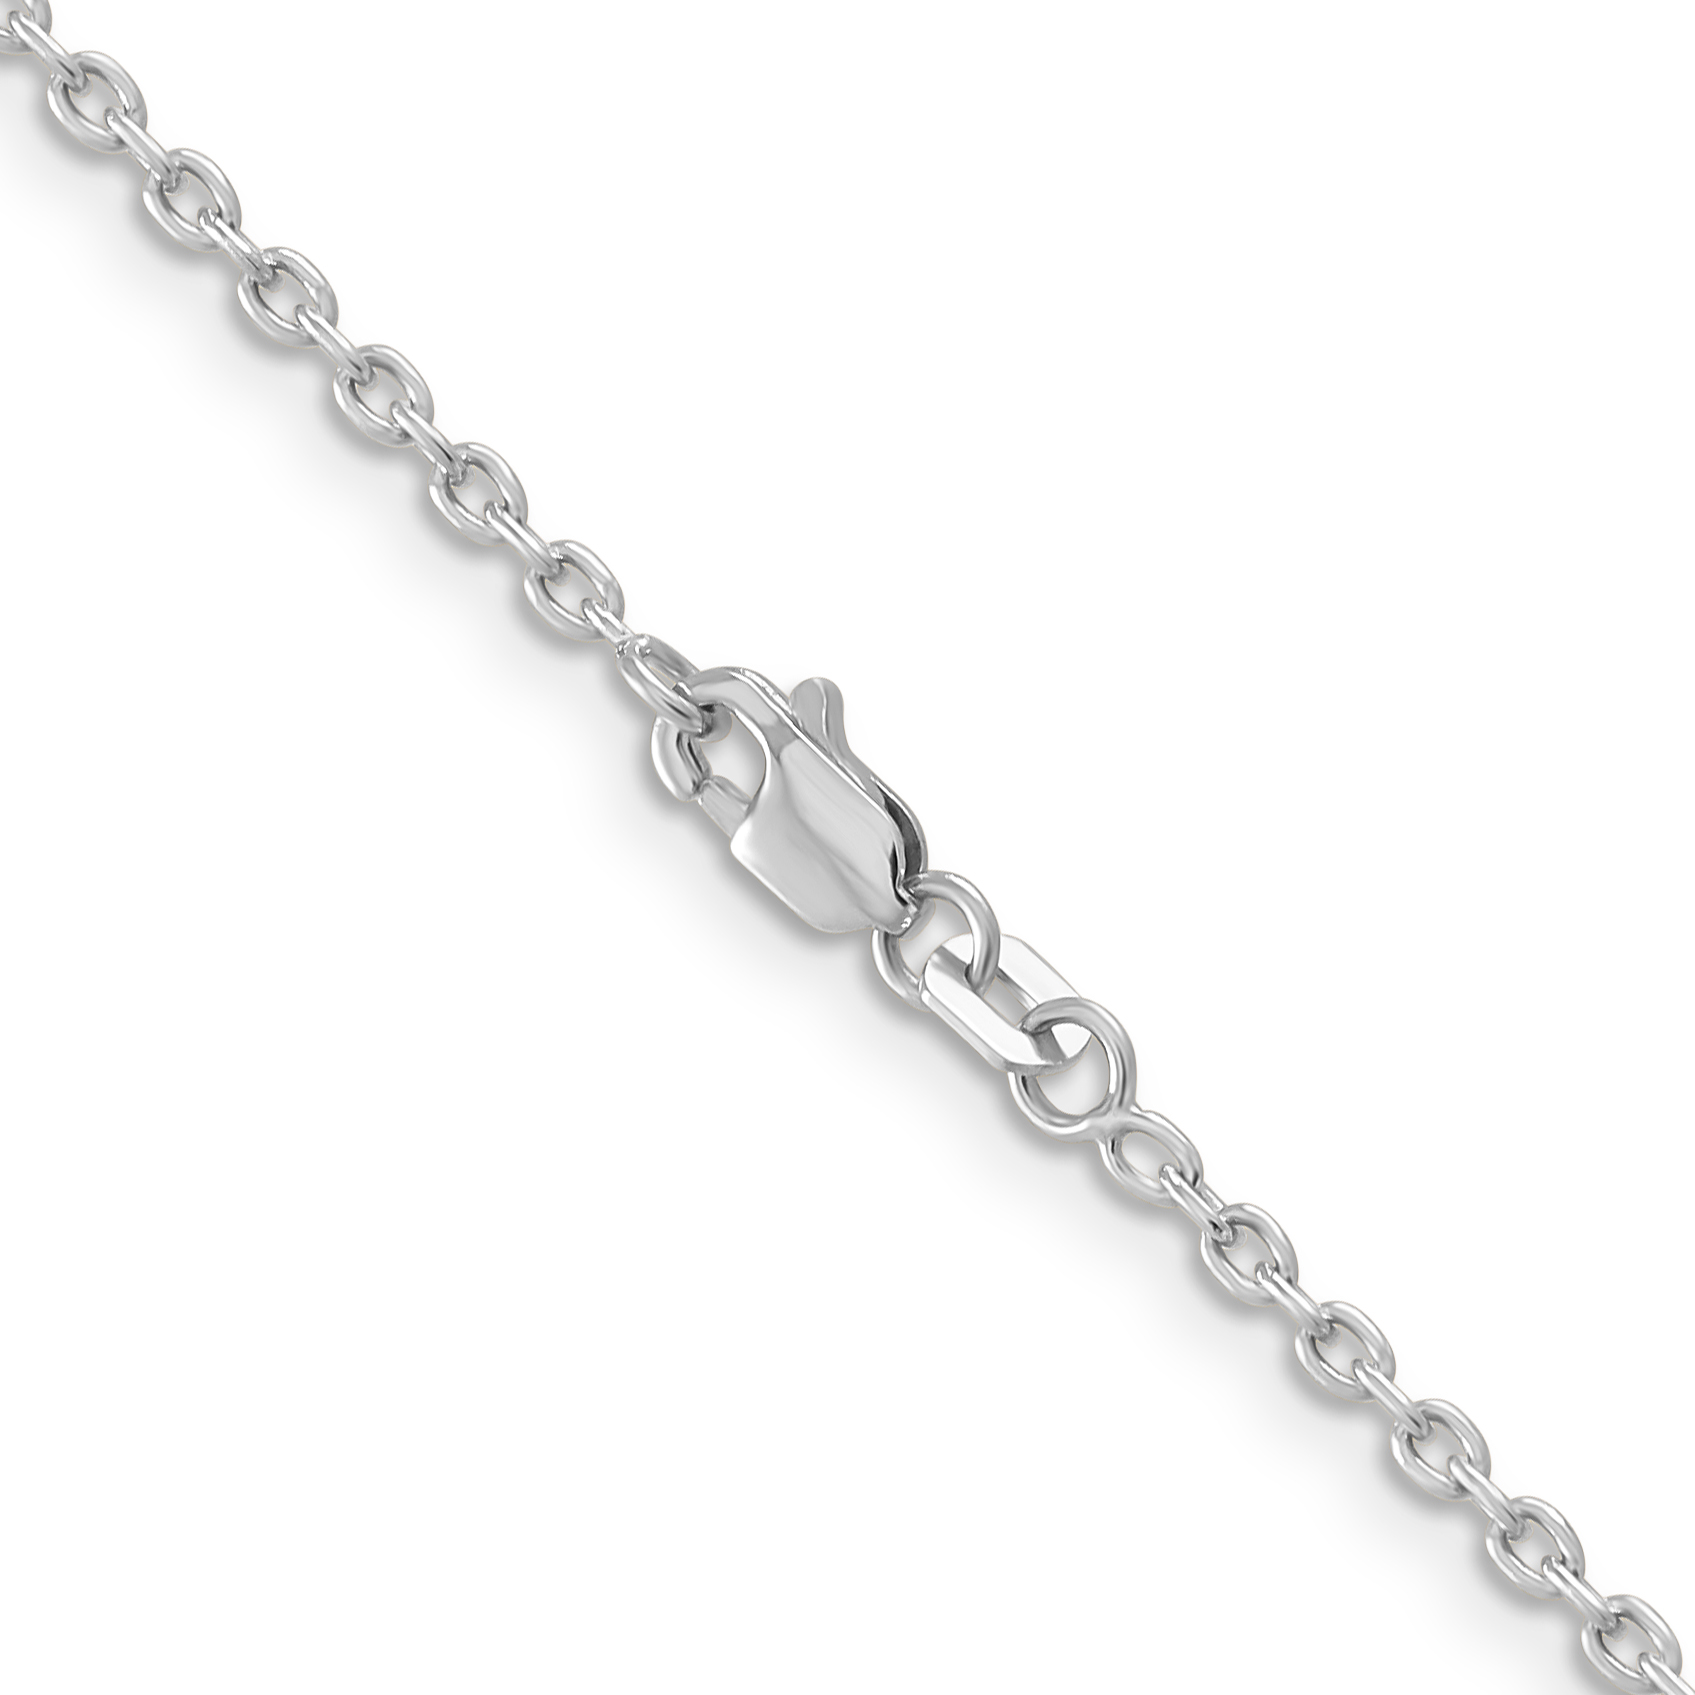 14k White Gold 2mm Link Cable Chain Necklace 24 Inch Pendant Mothers